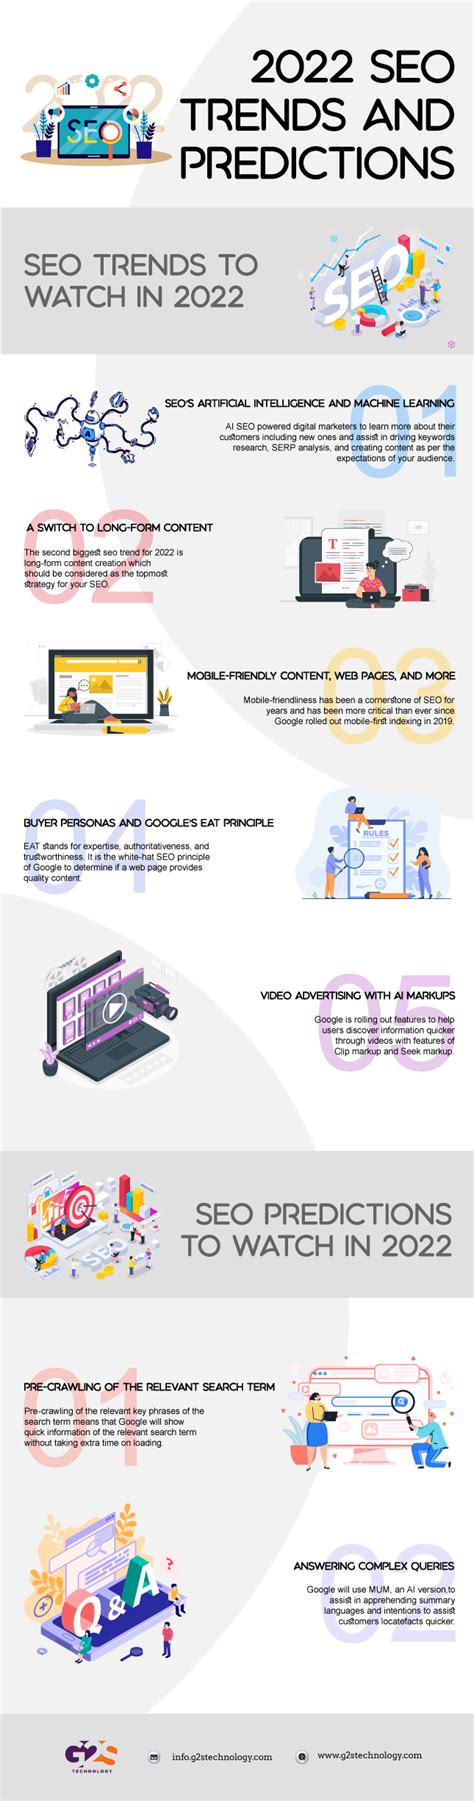 seo trends predictions infographic gs blog